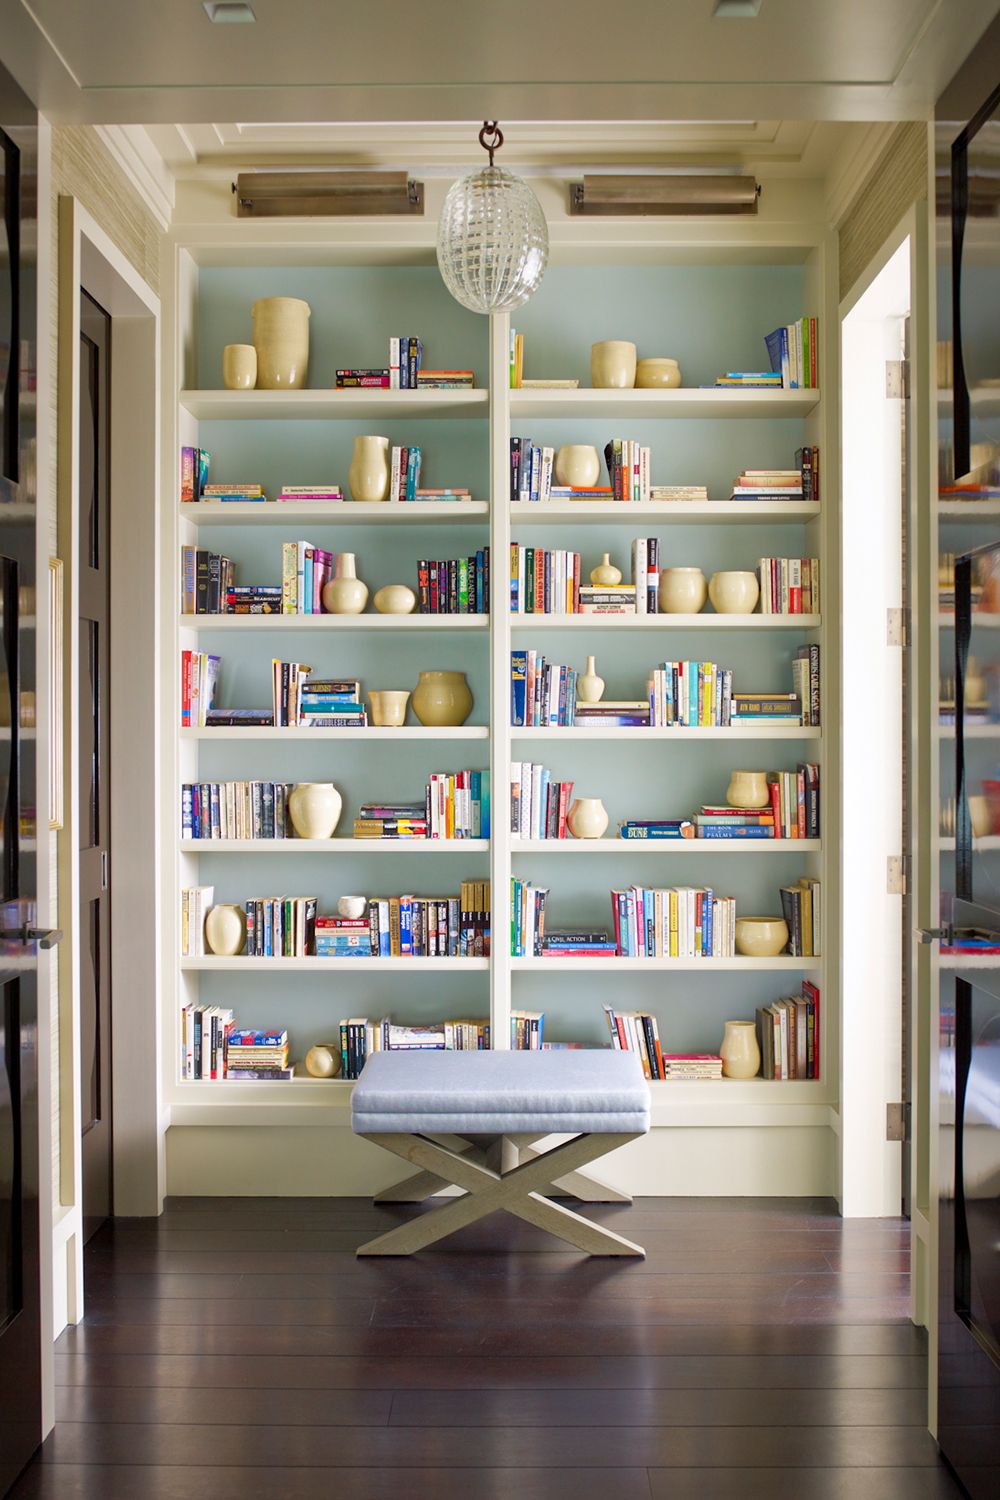 Floor To Ceiling Shelving Ideas, Bookcases And Shelving